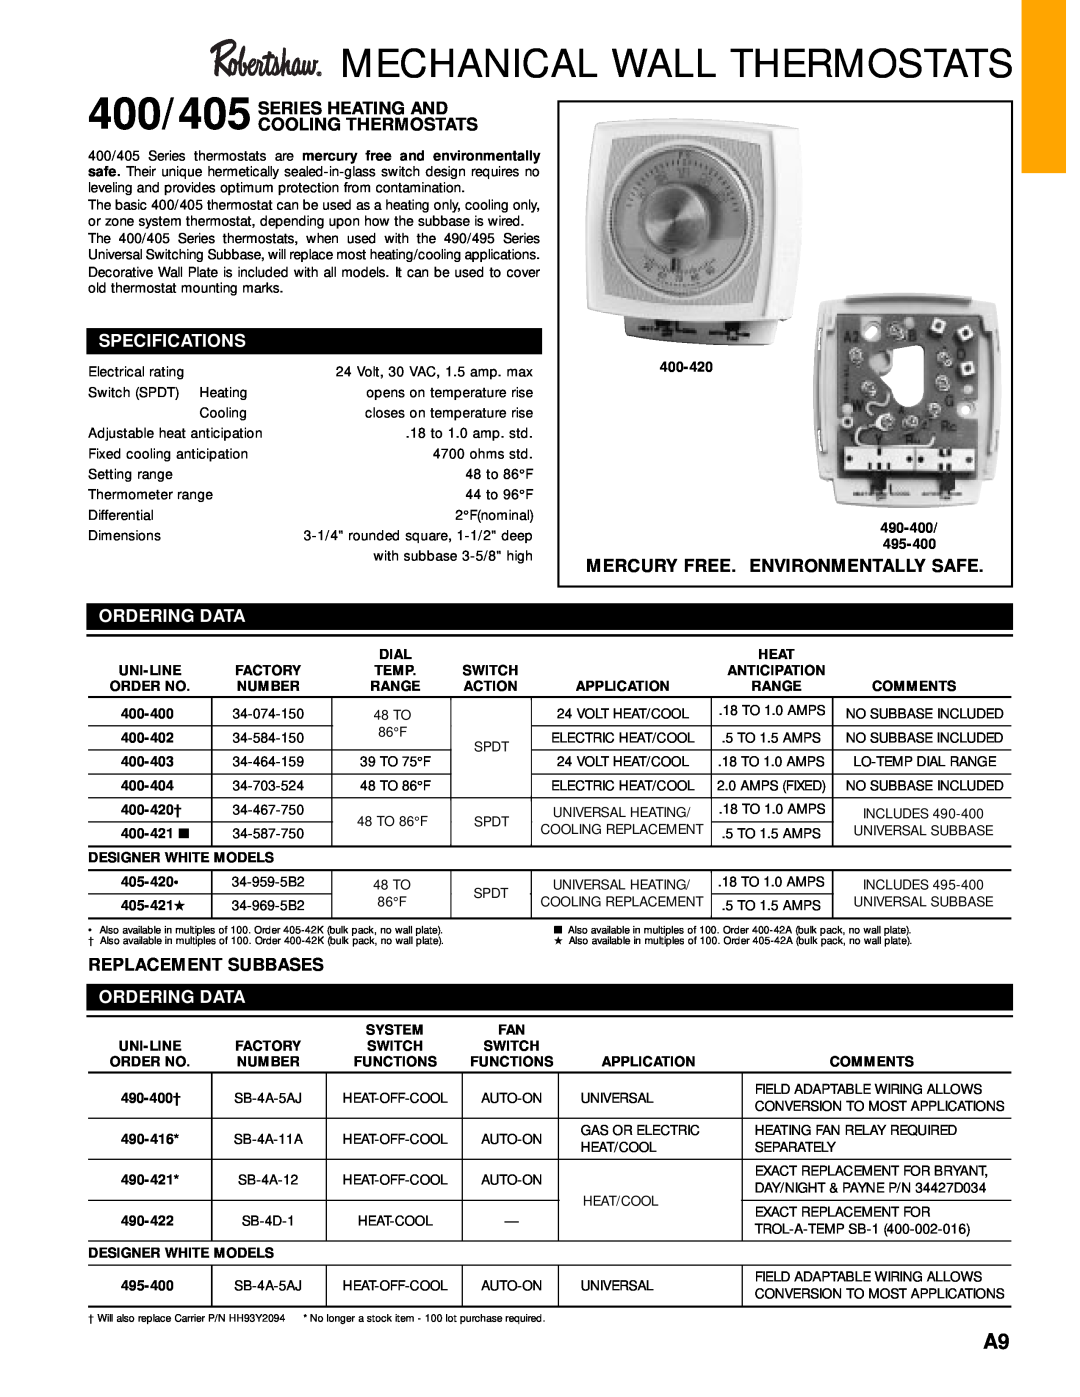 Robertshaw 400-420 specifications Mechanical Wall Thermostats, 400/405 SERIES HEATING AND COOLING THERMOSTATS 